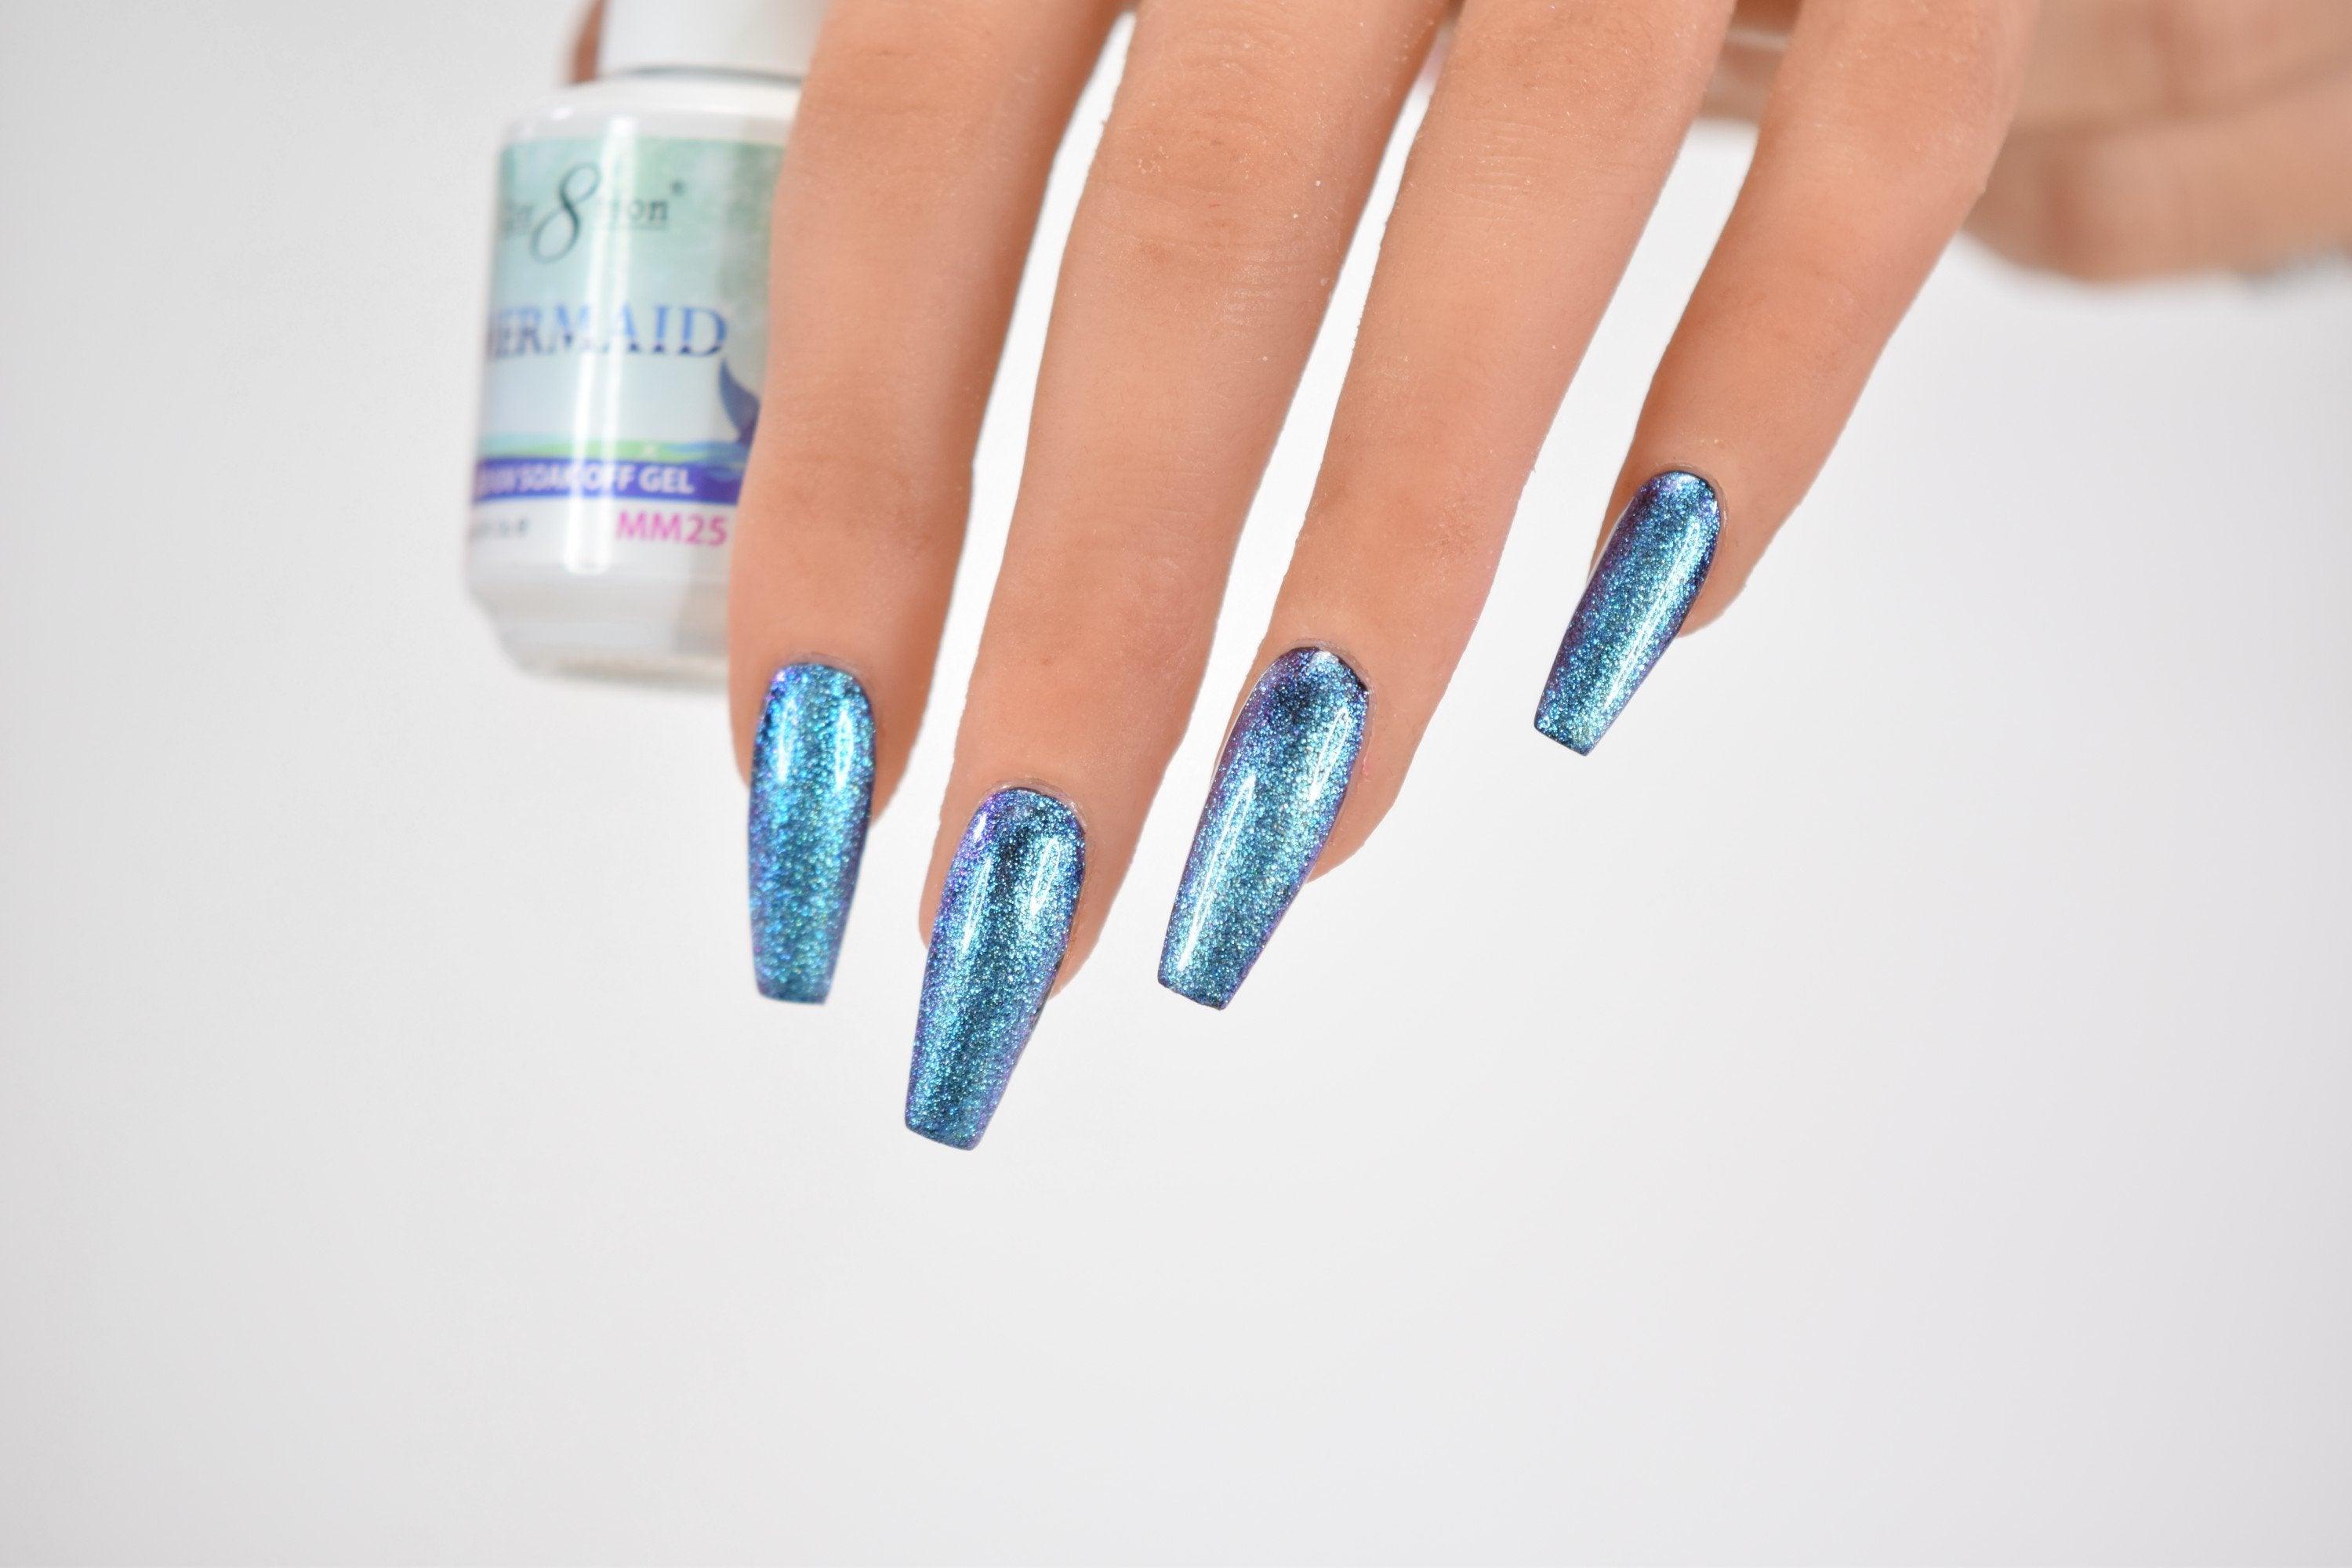 Cre8tion Soak Off Gel - Mermaid Collection #25